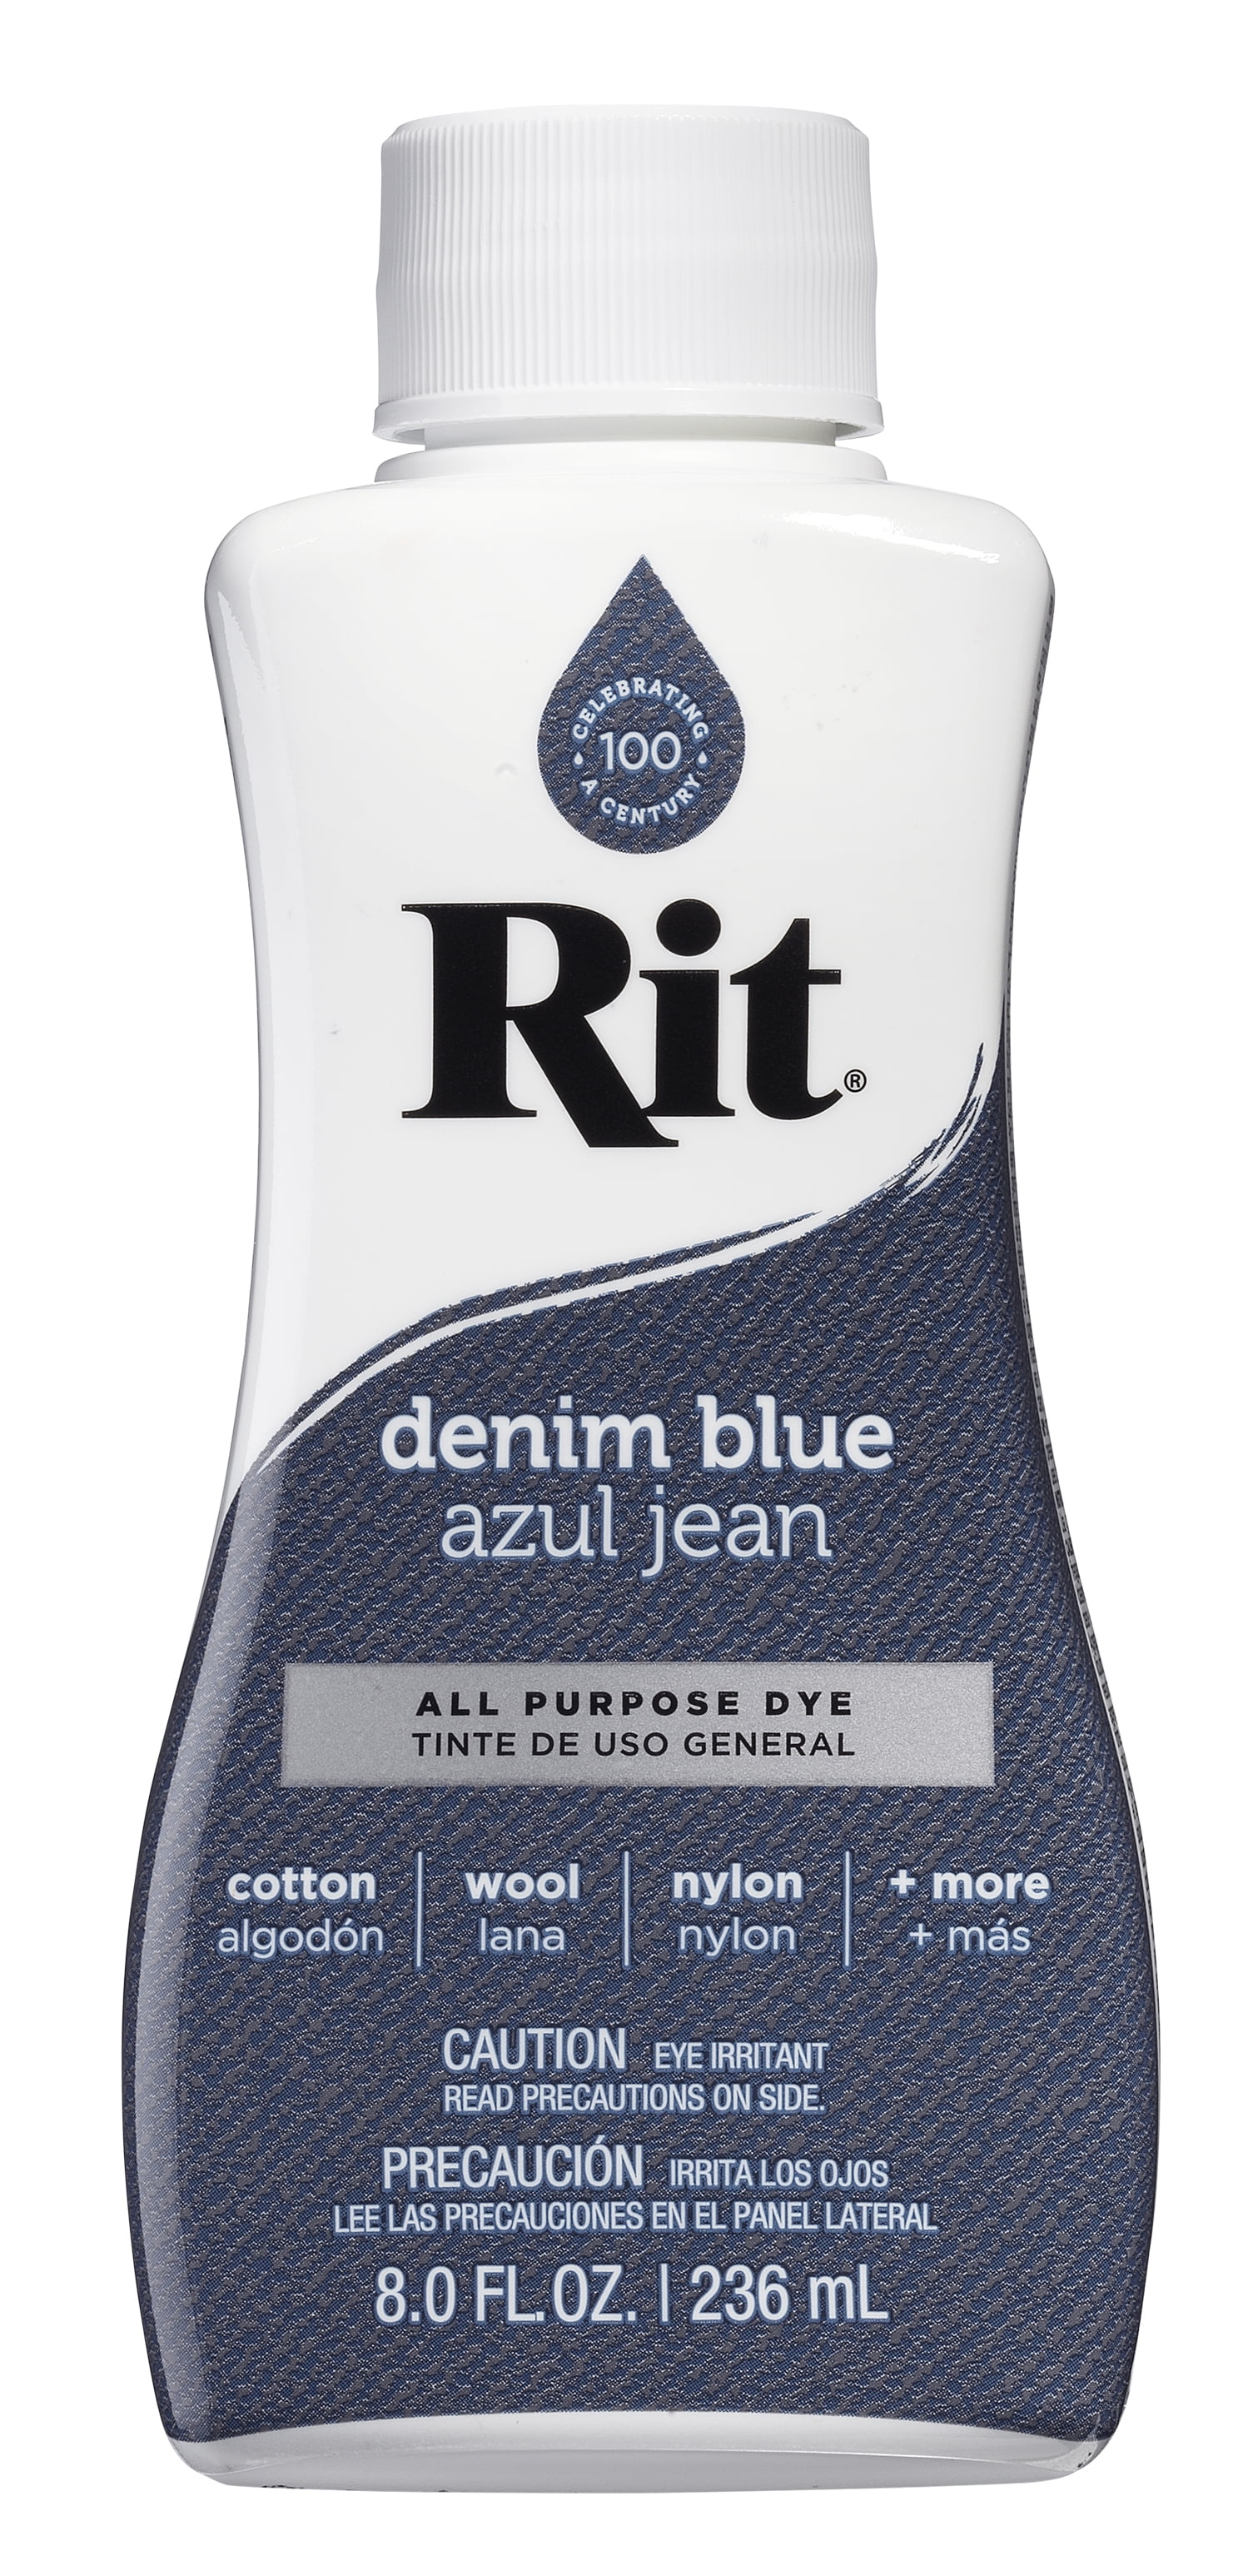  Rit Dye Liquid Denim Blue All-Purpose Dye (8oz) - Pixiss Tie Dye  Kit and Accessories Set Bundle with Rubber Bands, Gloves, Funnel and  Squeeze Bottle - Tie Dye Party Supplies